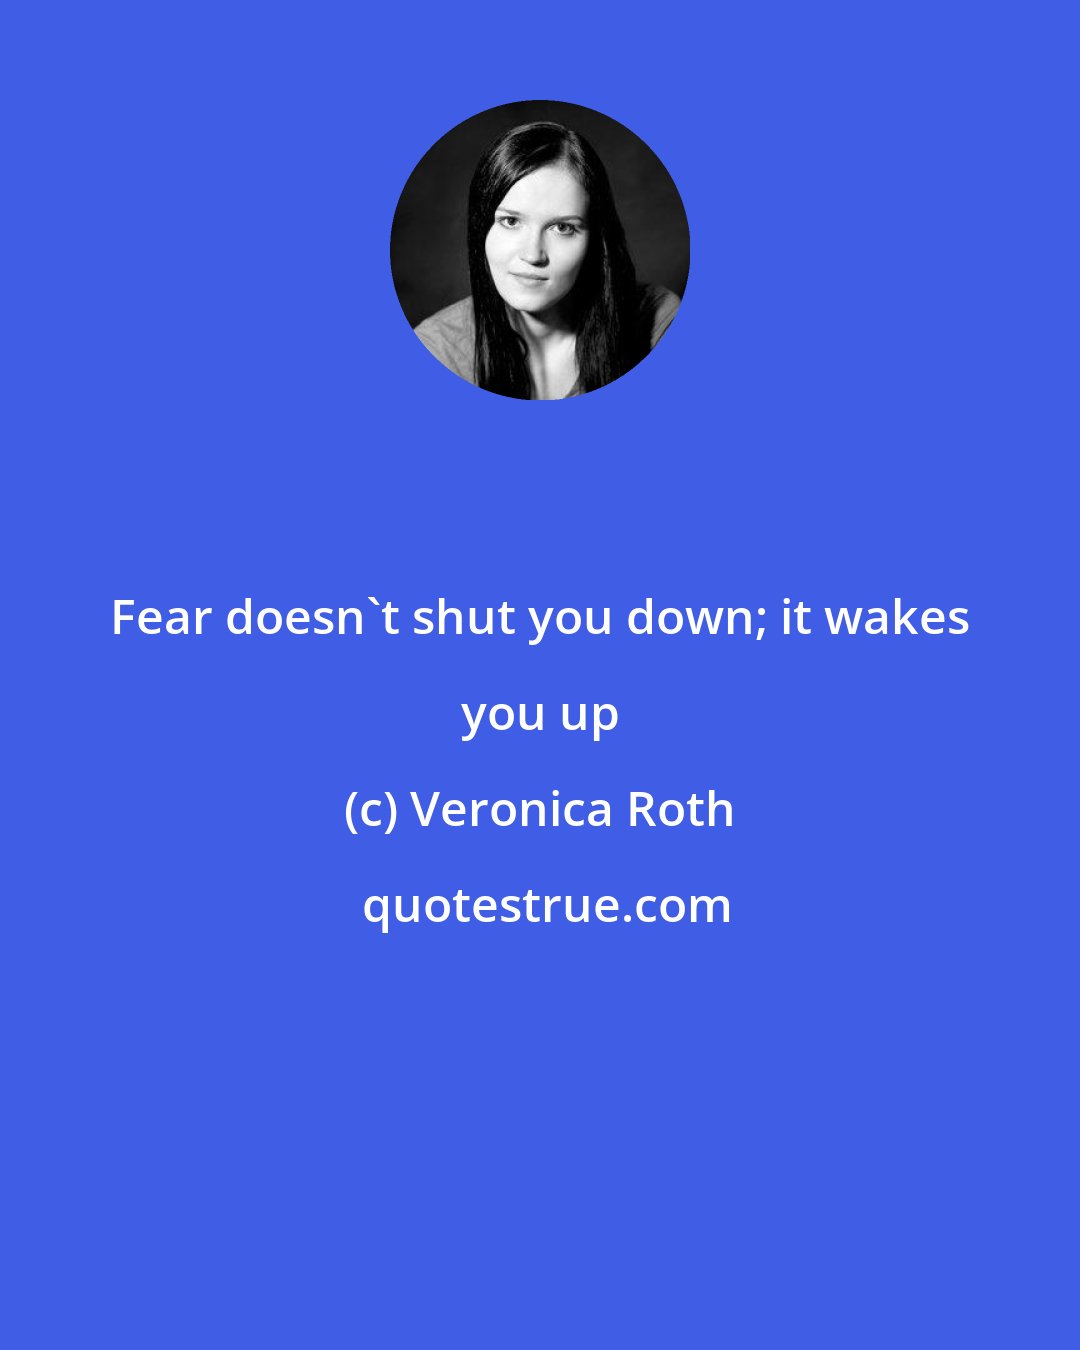 Veronica Roth: Fear doesn't shut you down; it wakes you up